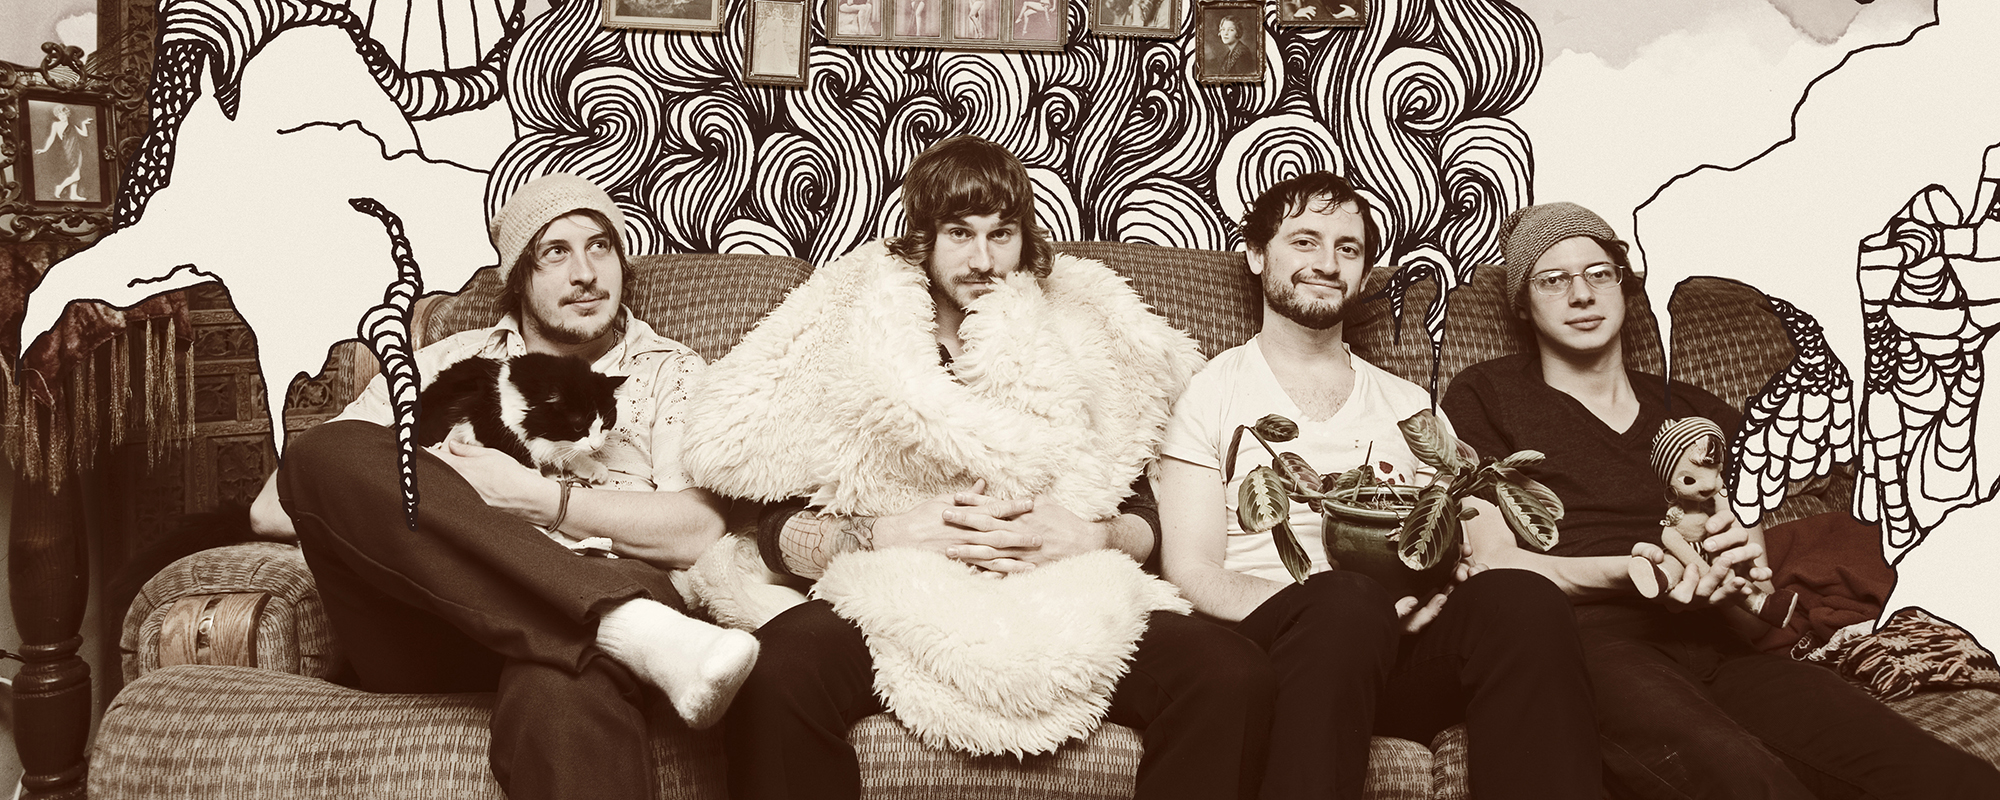 Portugal. The Man Release Documentary, Clothing Line to Benefit Alaska’s Indigenous Peoples